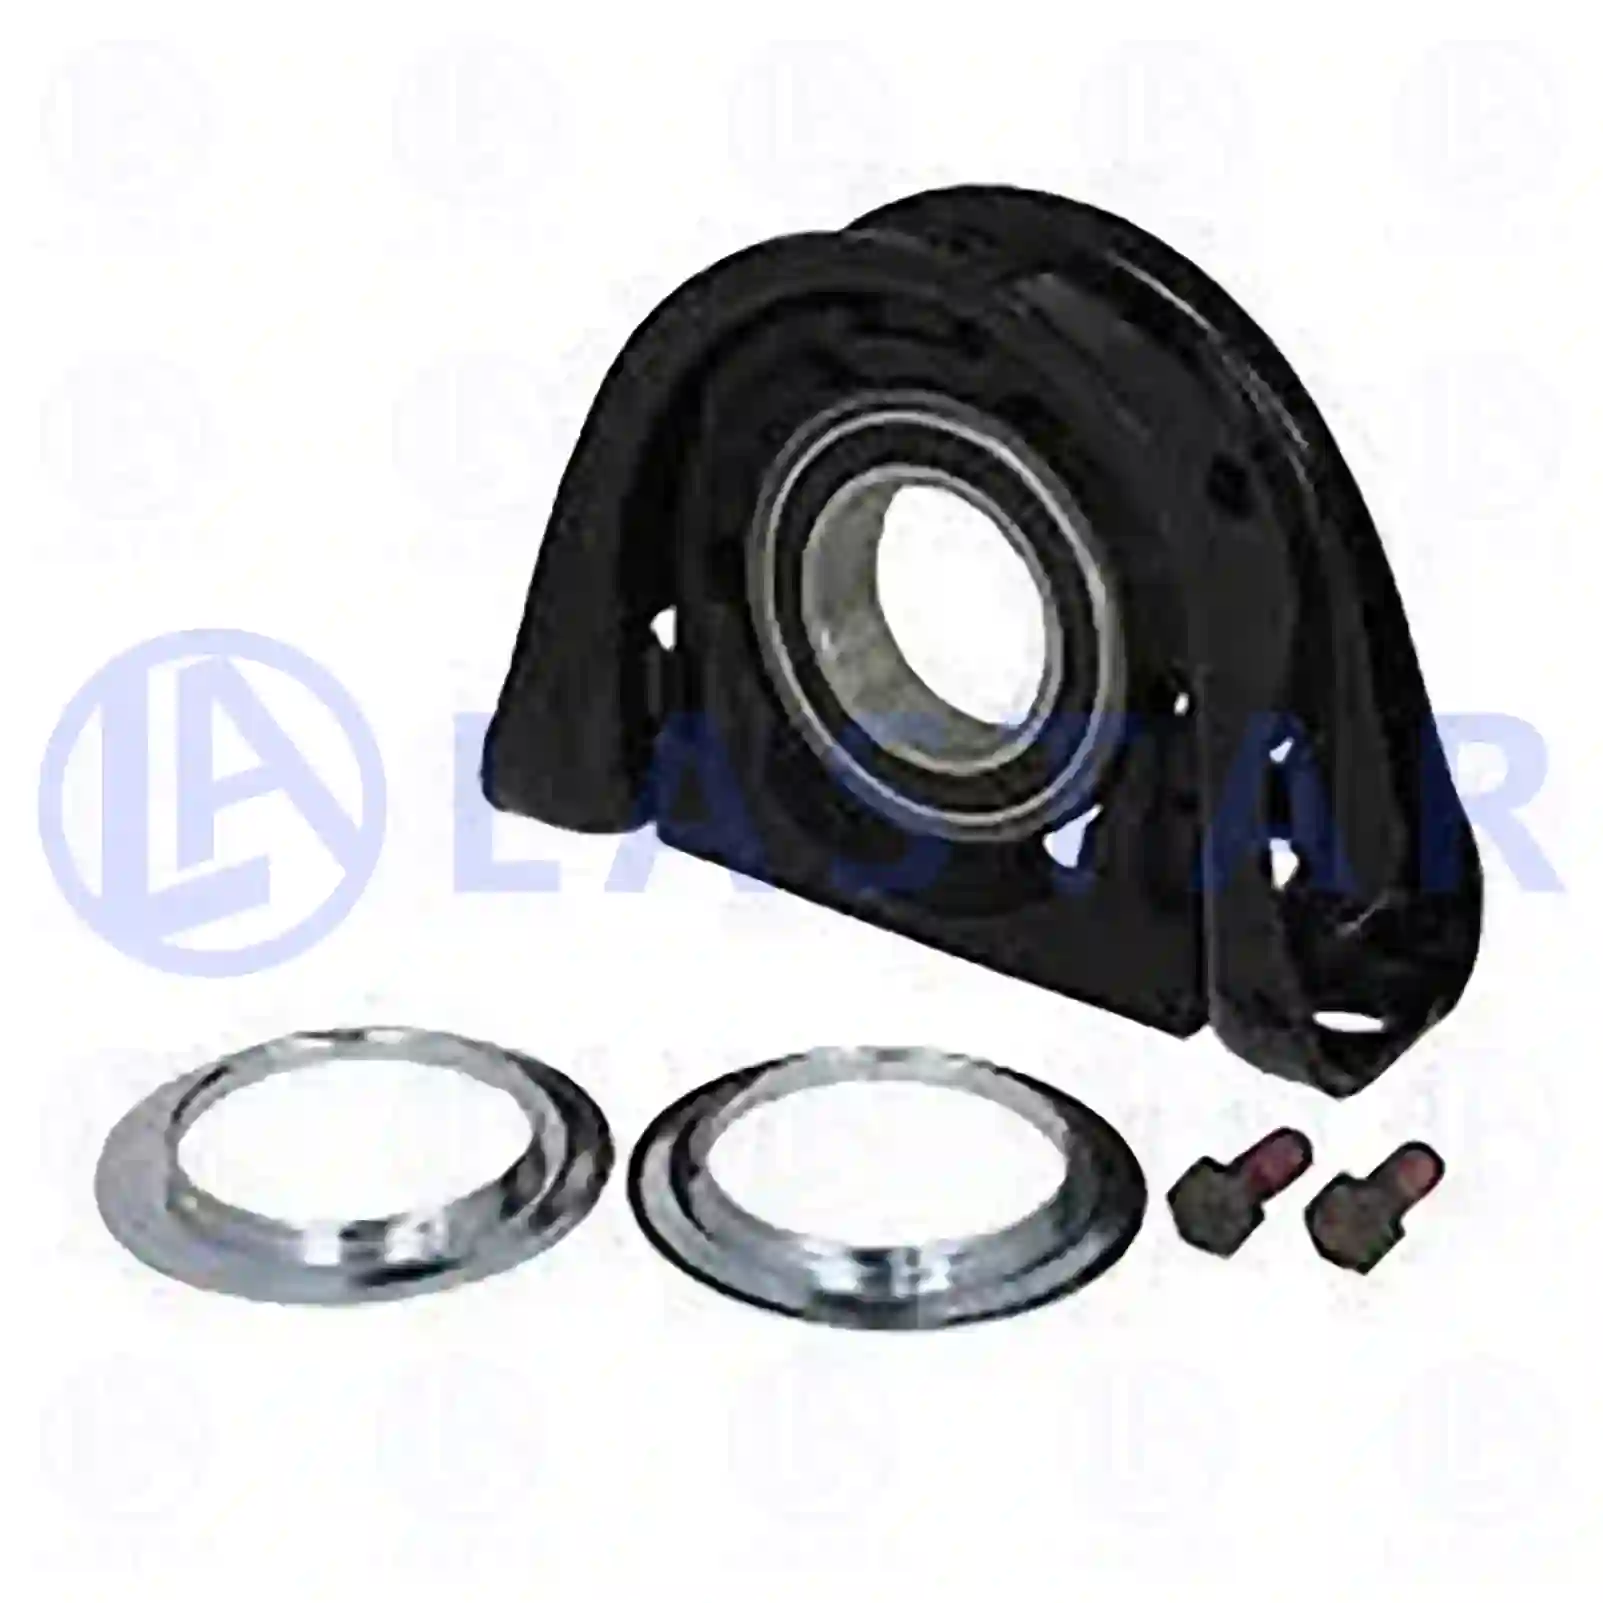 Support Bearing Center bearing, la no: 77734230 ,  oem no:21081150, 22611720, 25641426 Lastar Spare Part | Truck Spare Parts, Auotomotive Spare Parts